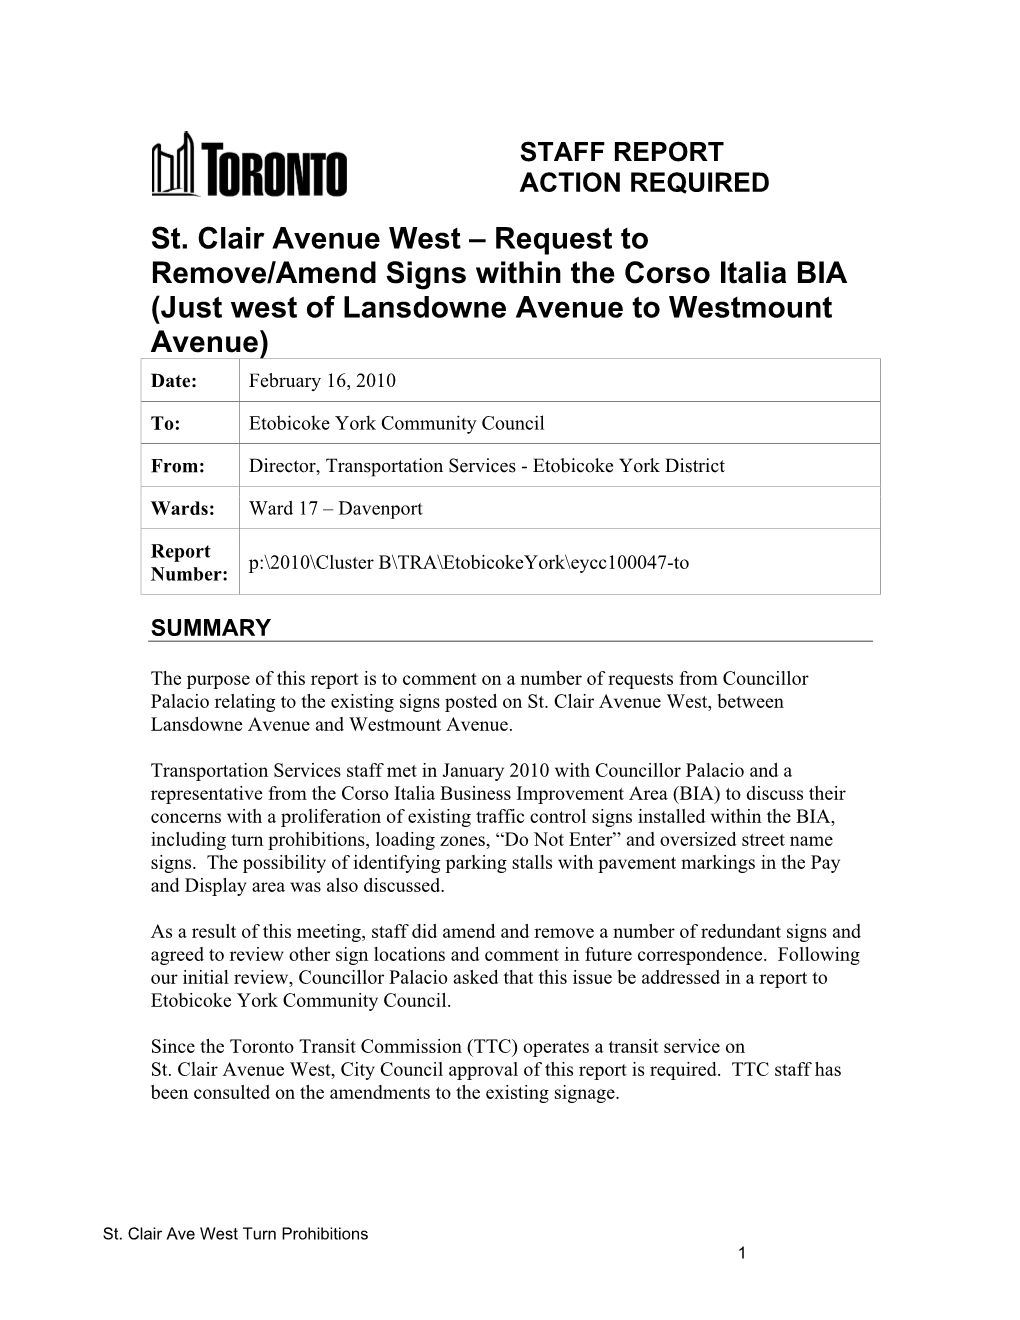 St. Clair Avenue West – Request to Remove/Amend Signs Within the Corso Italia BIA (Just West of Lansdowne Avenue to Westmount Avenue) Date: February 16, 2010